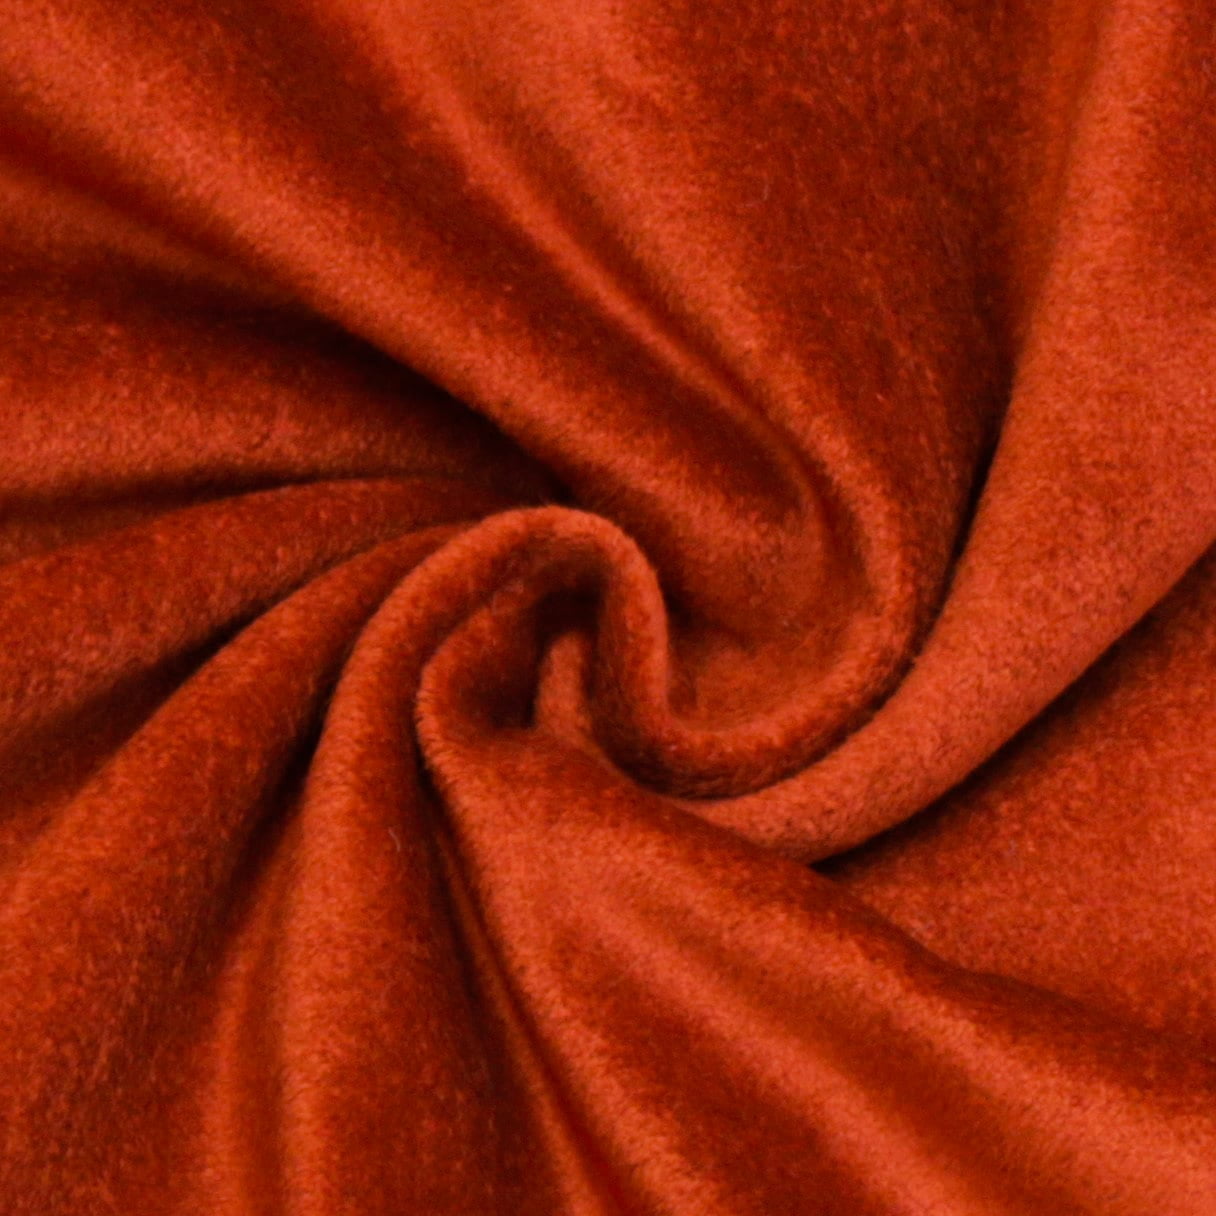  Fabric Mart Direct Coral, Orange Jacquard Velvet Fabric by The  Yard, 54 inches or 137 cm Width, 1 Yard Orange Jacquard Fabric, Geometric  Art Deco Chenille, Upholstery Drapery Curtain Wholesale Fabric 